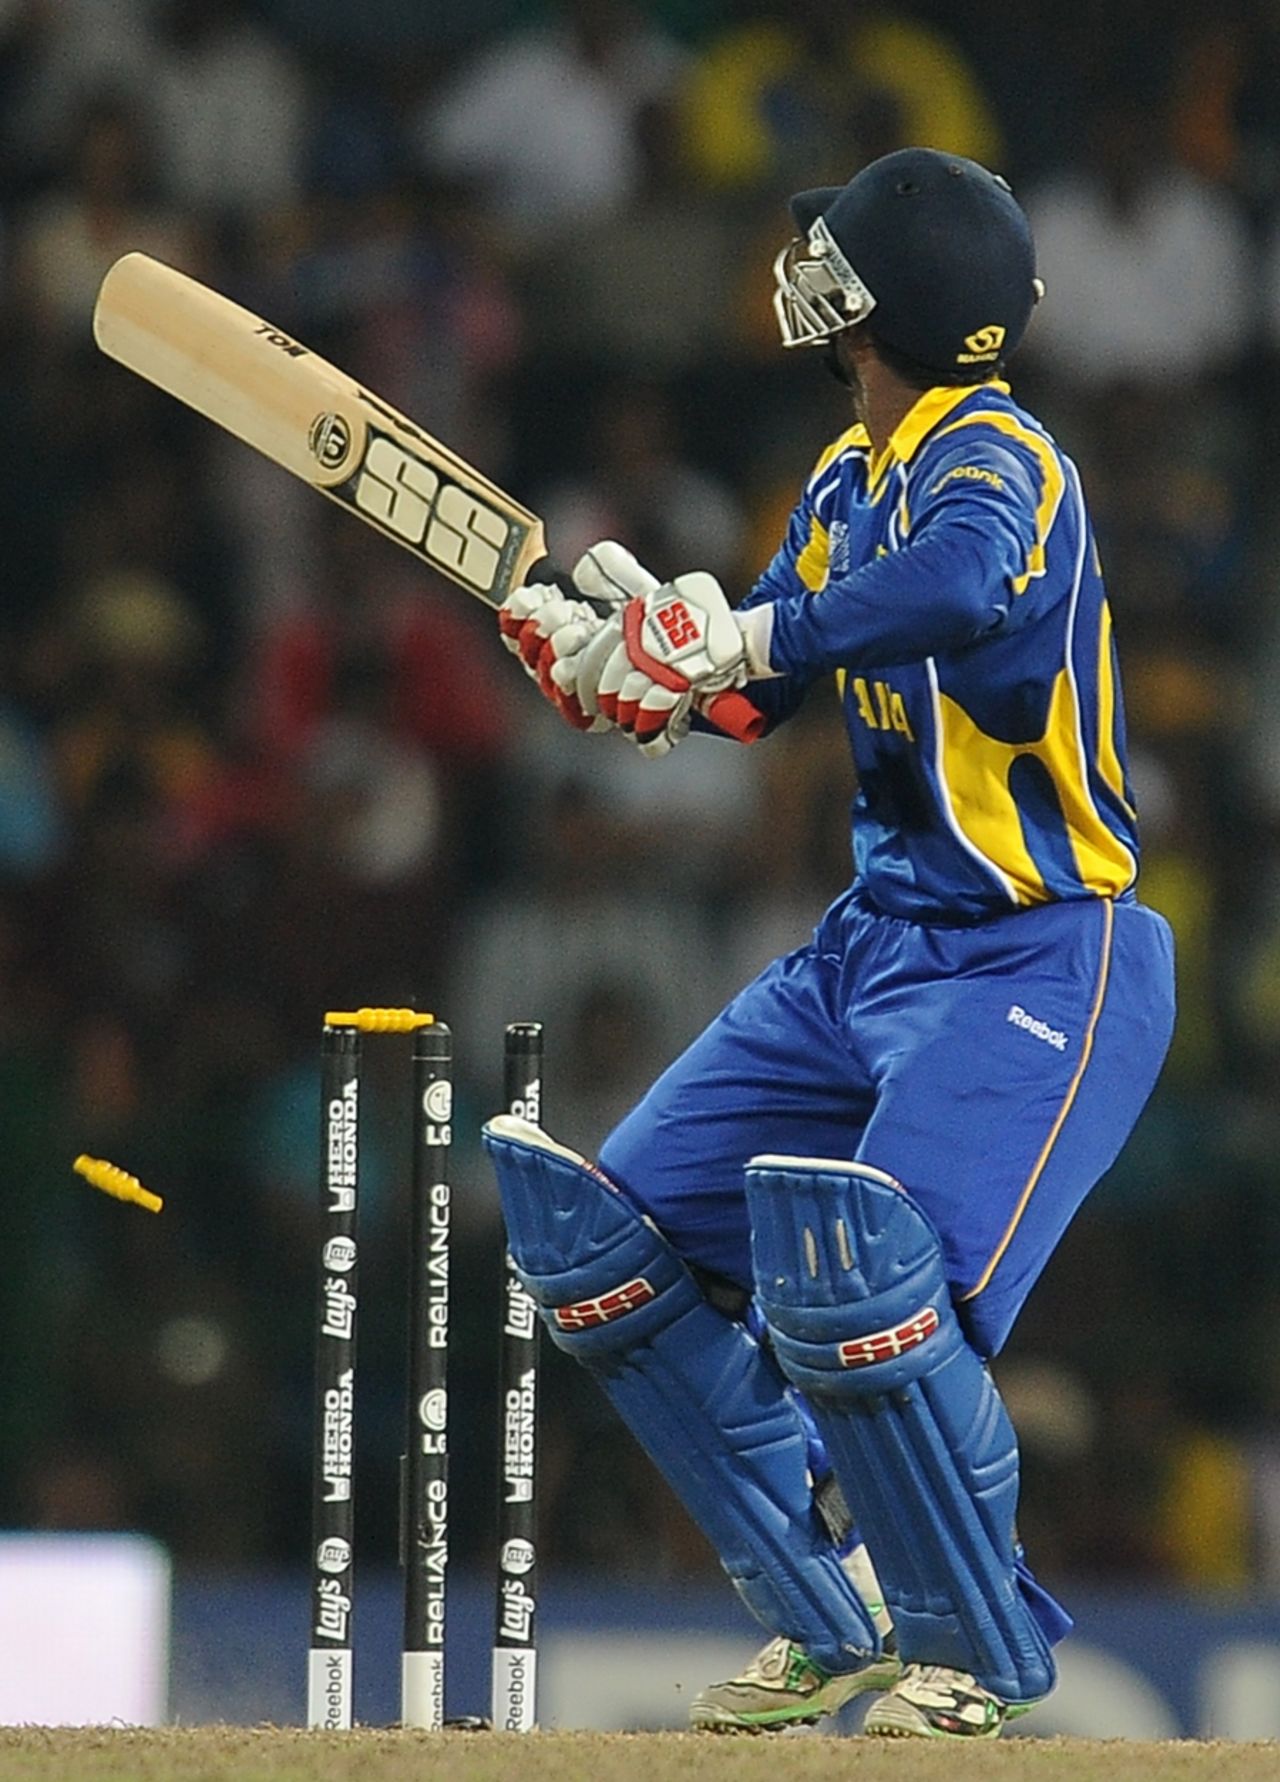 Chamara Silva was bowled for 13 to set up a thrilling finish, Sri Lanka v New Zealand, 1st semi-final, World Cup 2011, Colombo, March 29, 2011